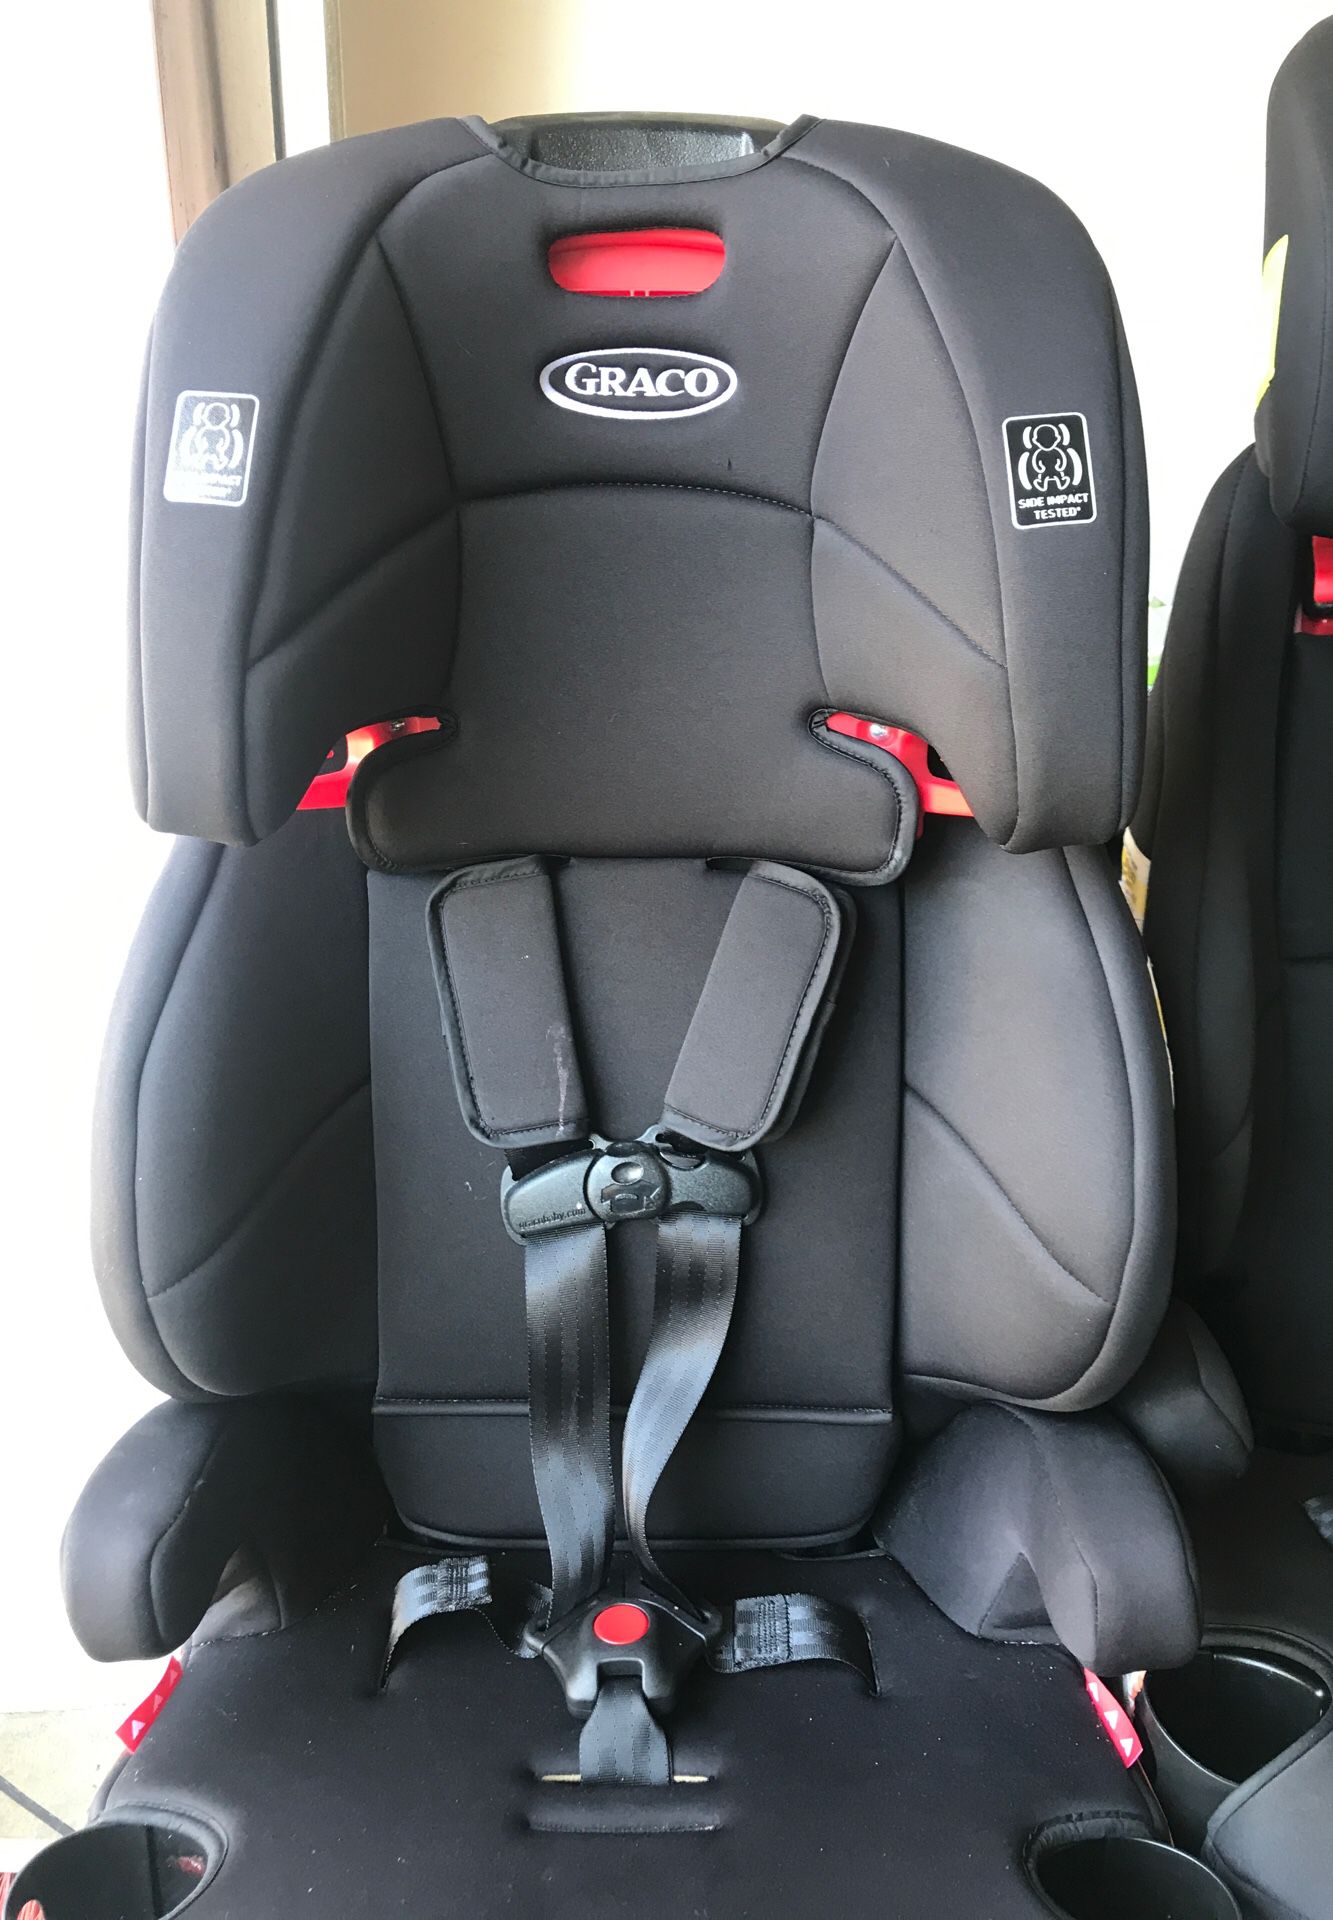 Graco 5 point harness booster seat